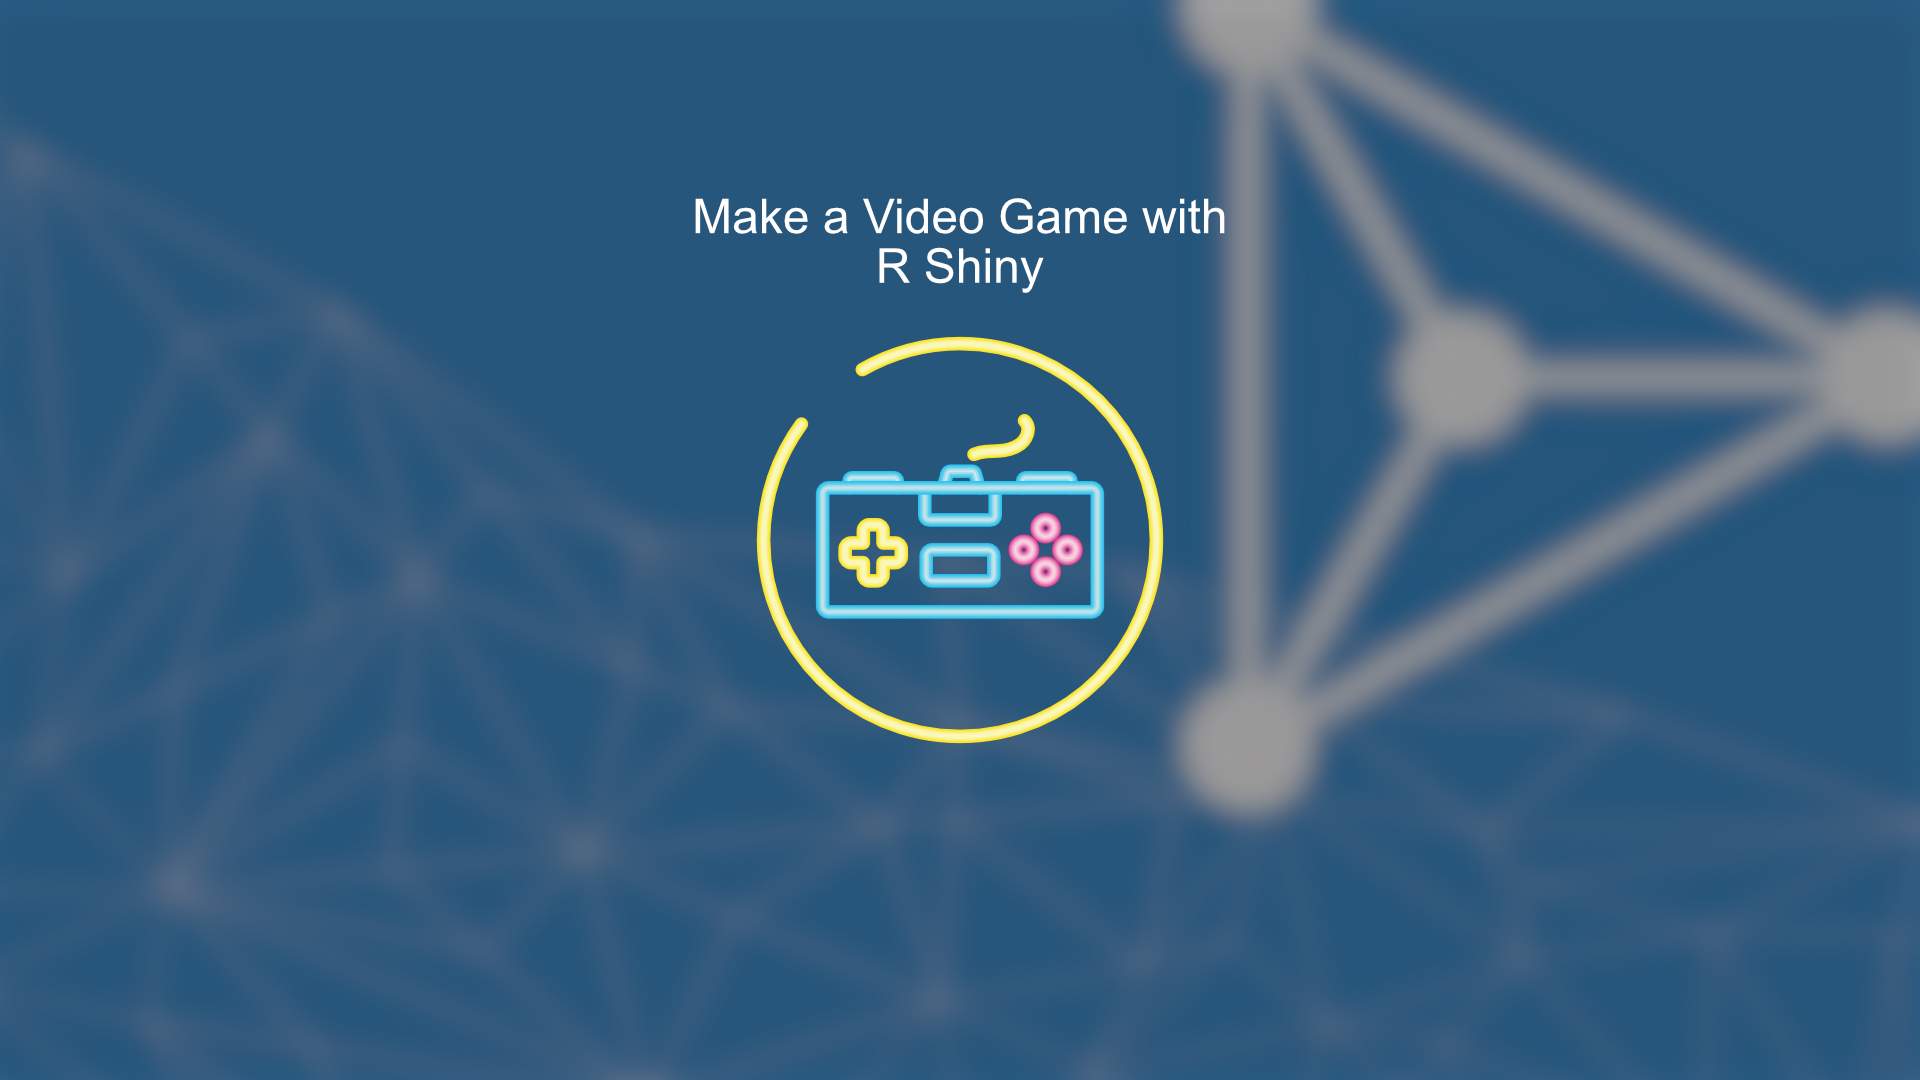 Create video games with Shiny thumbnail